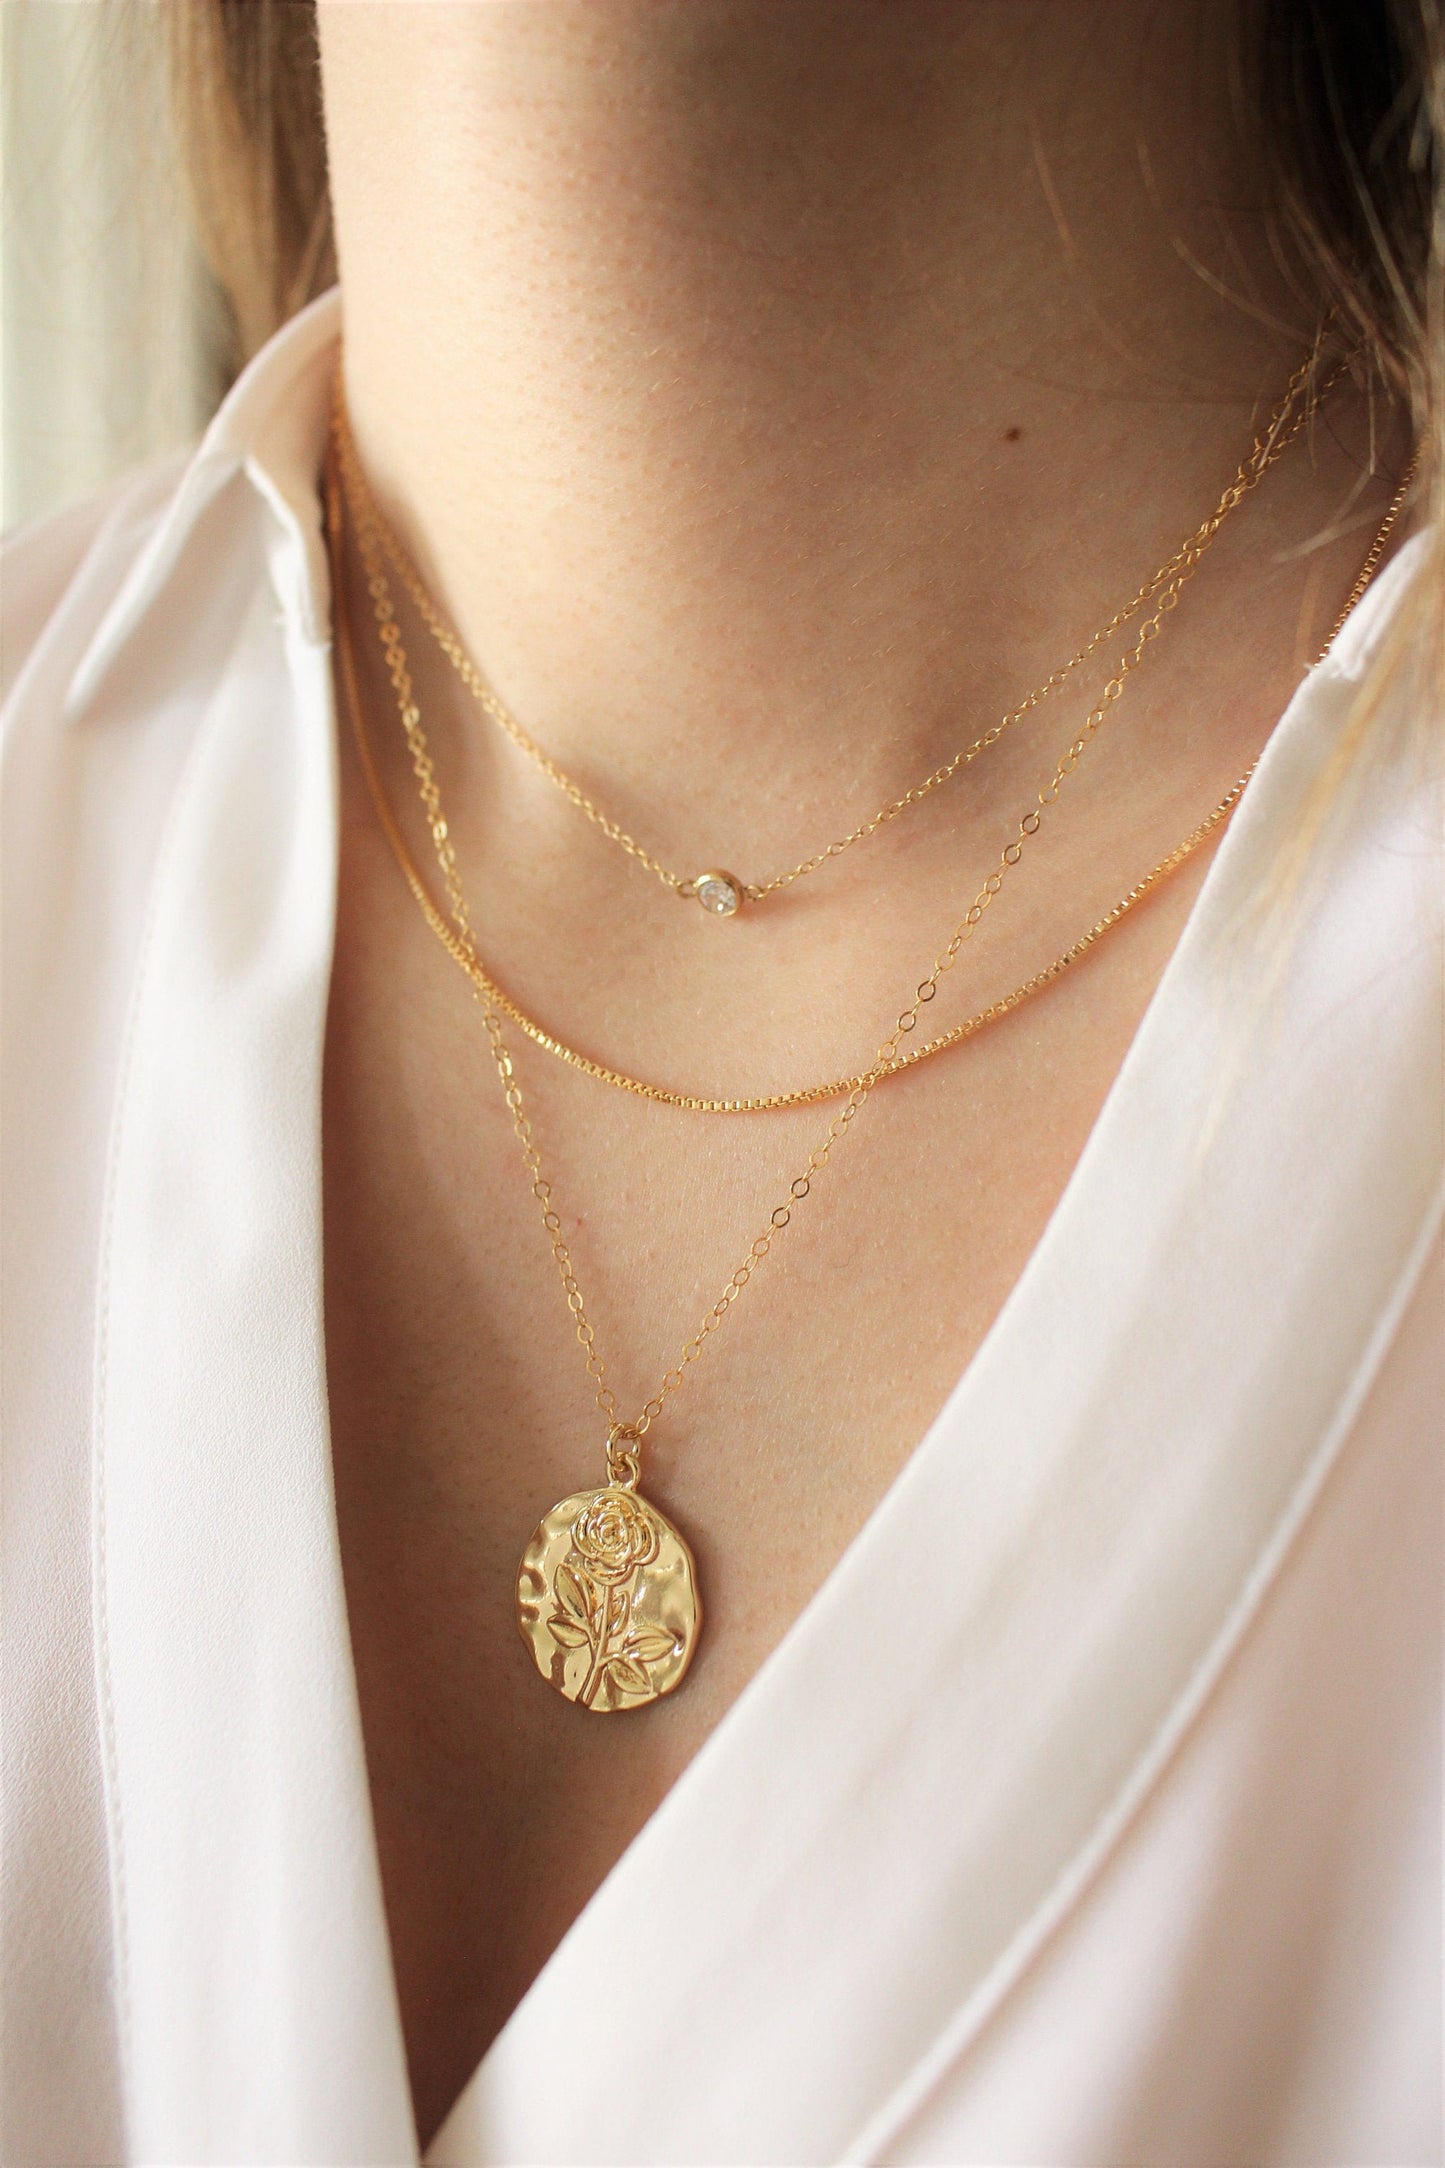 Rose Medallion Pendant Necklace ∙ 14K Gold Filled Chain, Coin, Flower Jewelry, Minimalist, Dainty Vintage Rose Gift for Her